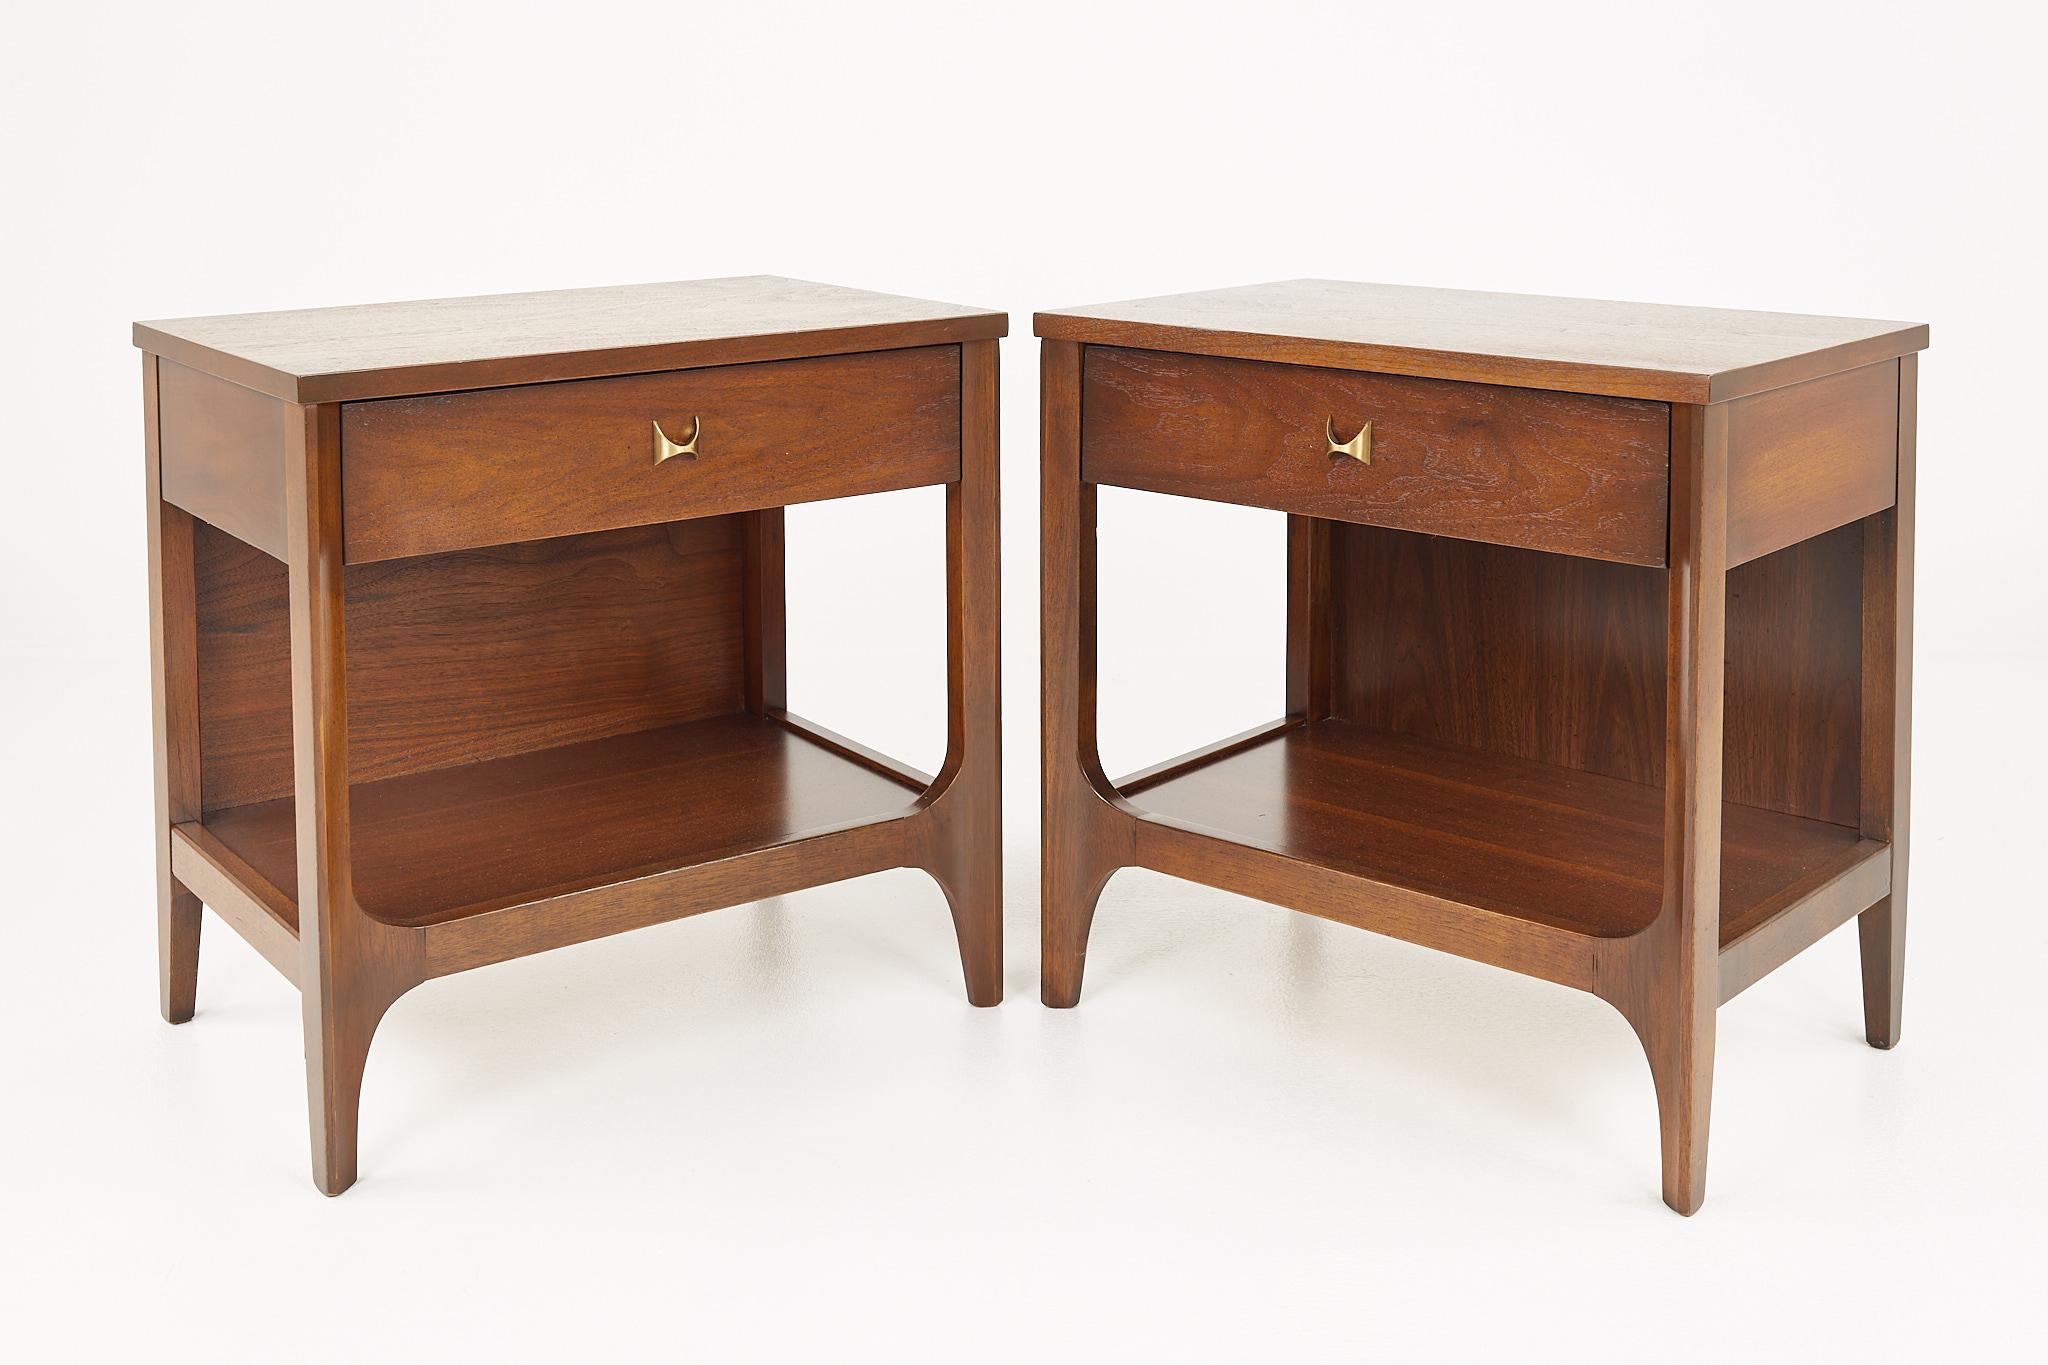 Broyhill Brasilia Brutalist Mid Century Walnut Nightstands - Pair 

Each nightstand measures: 22.25 wide x 15 deep x 22 inches high

?All pieces of furniture can be had in what we call restored vintage condition. That means the piece is restored